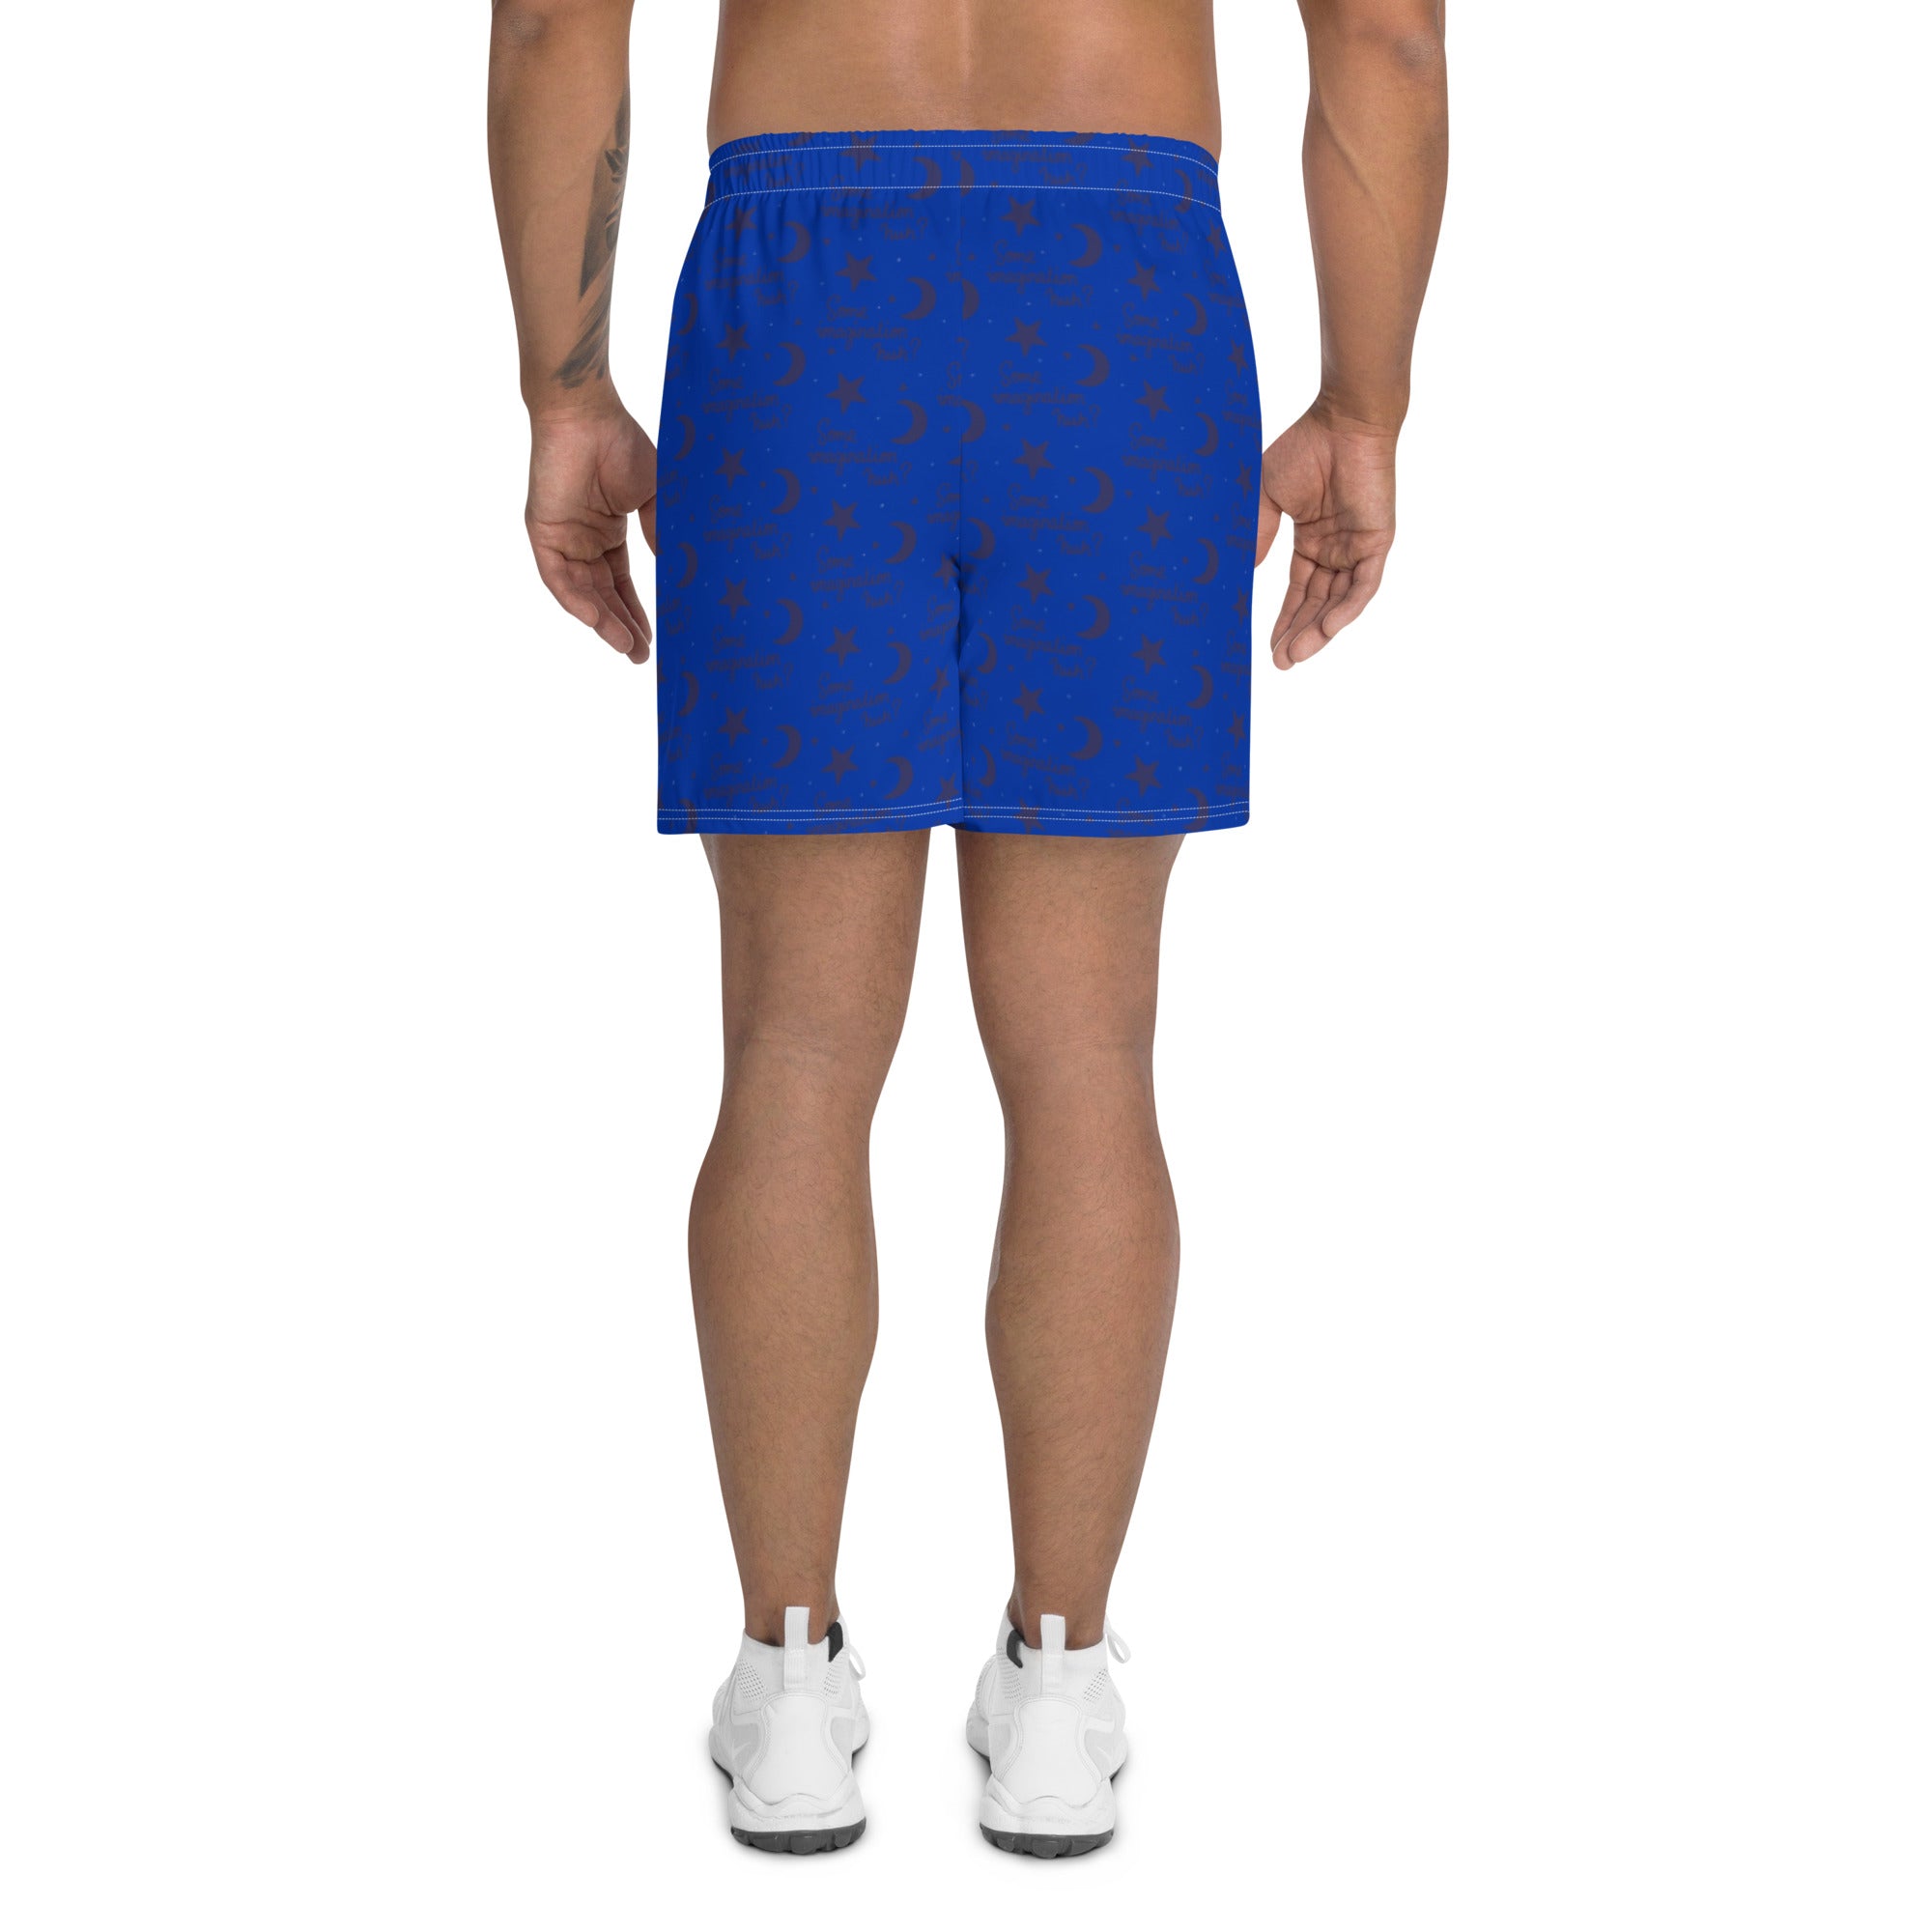 Some Imagination Men's Recycled Athletic Shorts